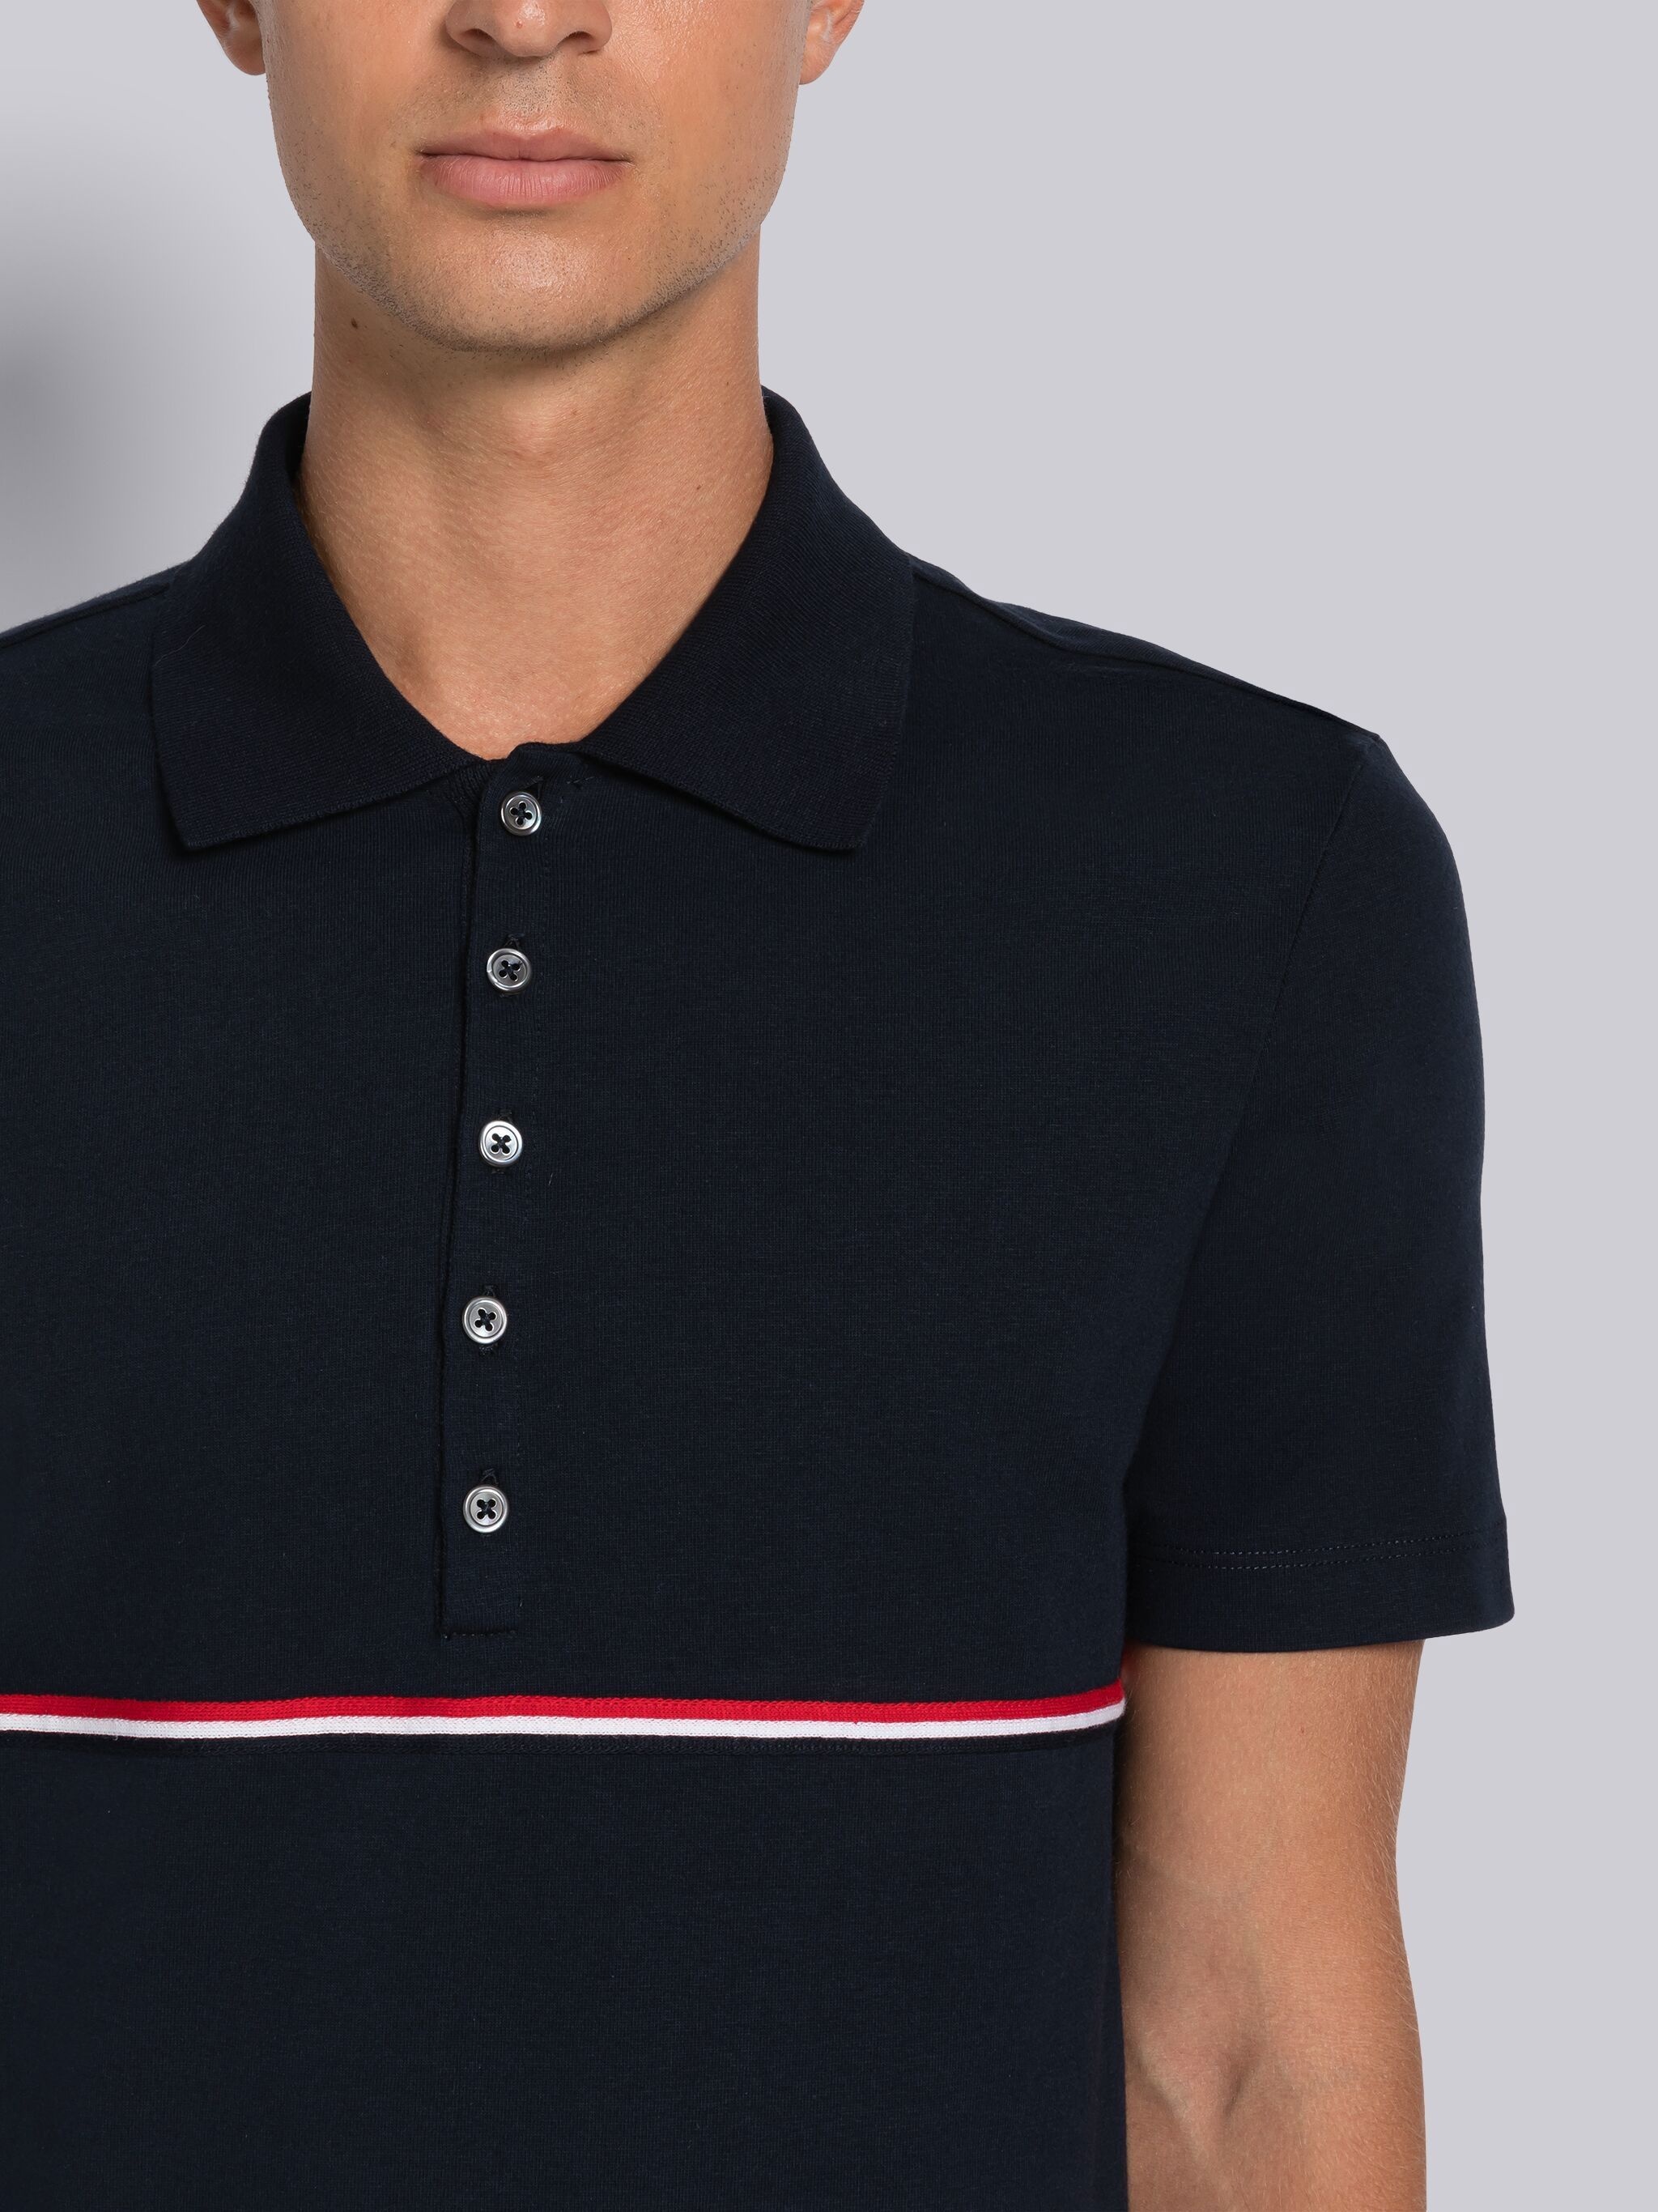 Midweight Jersey Stripe Short Sleeve Polo - 5